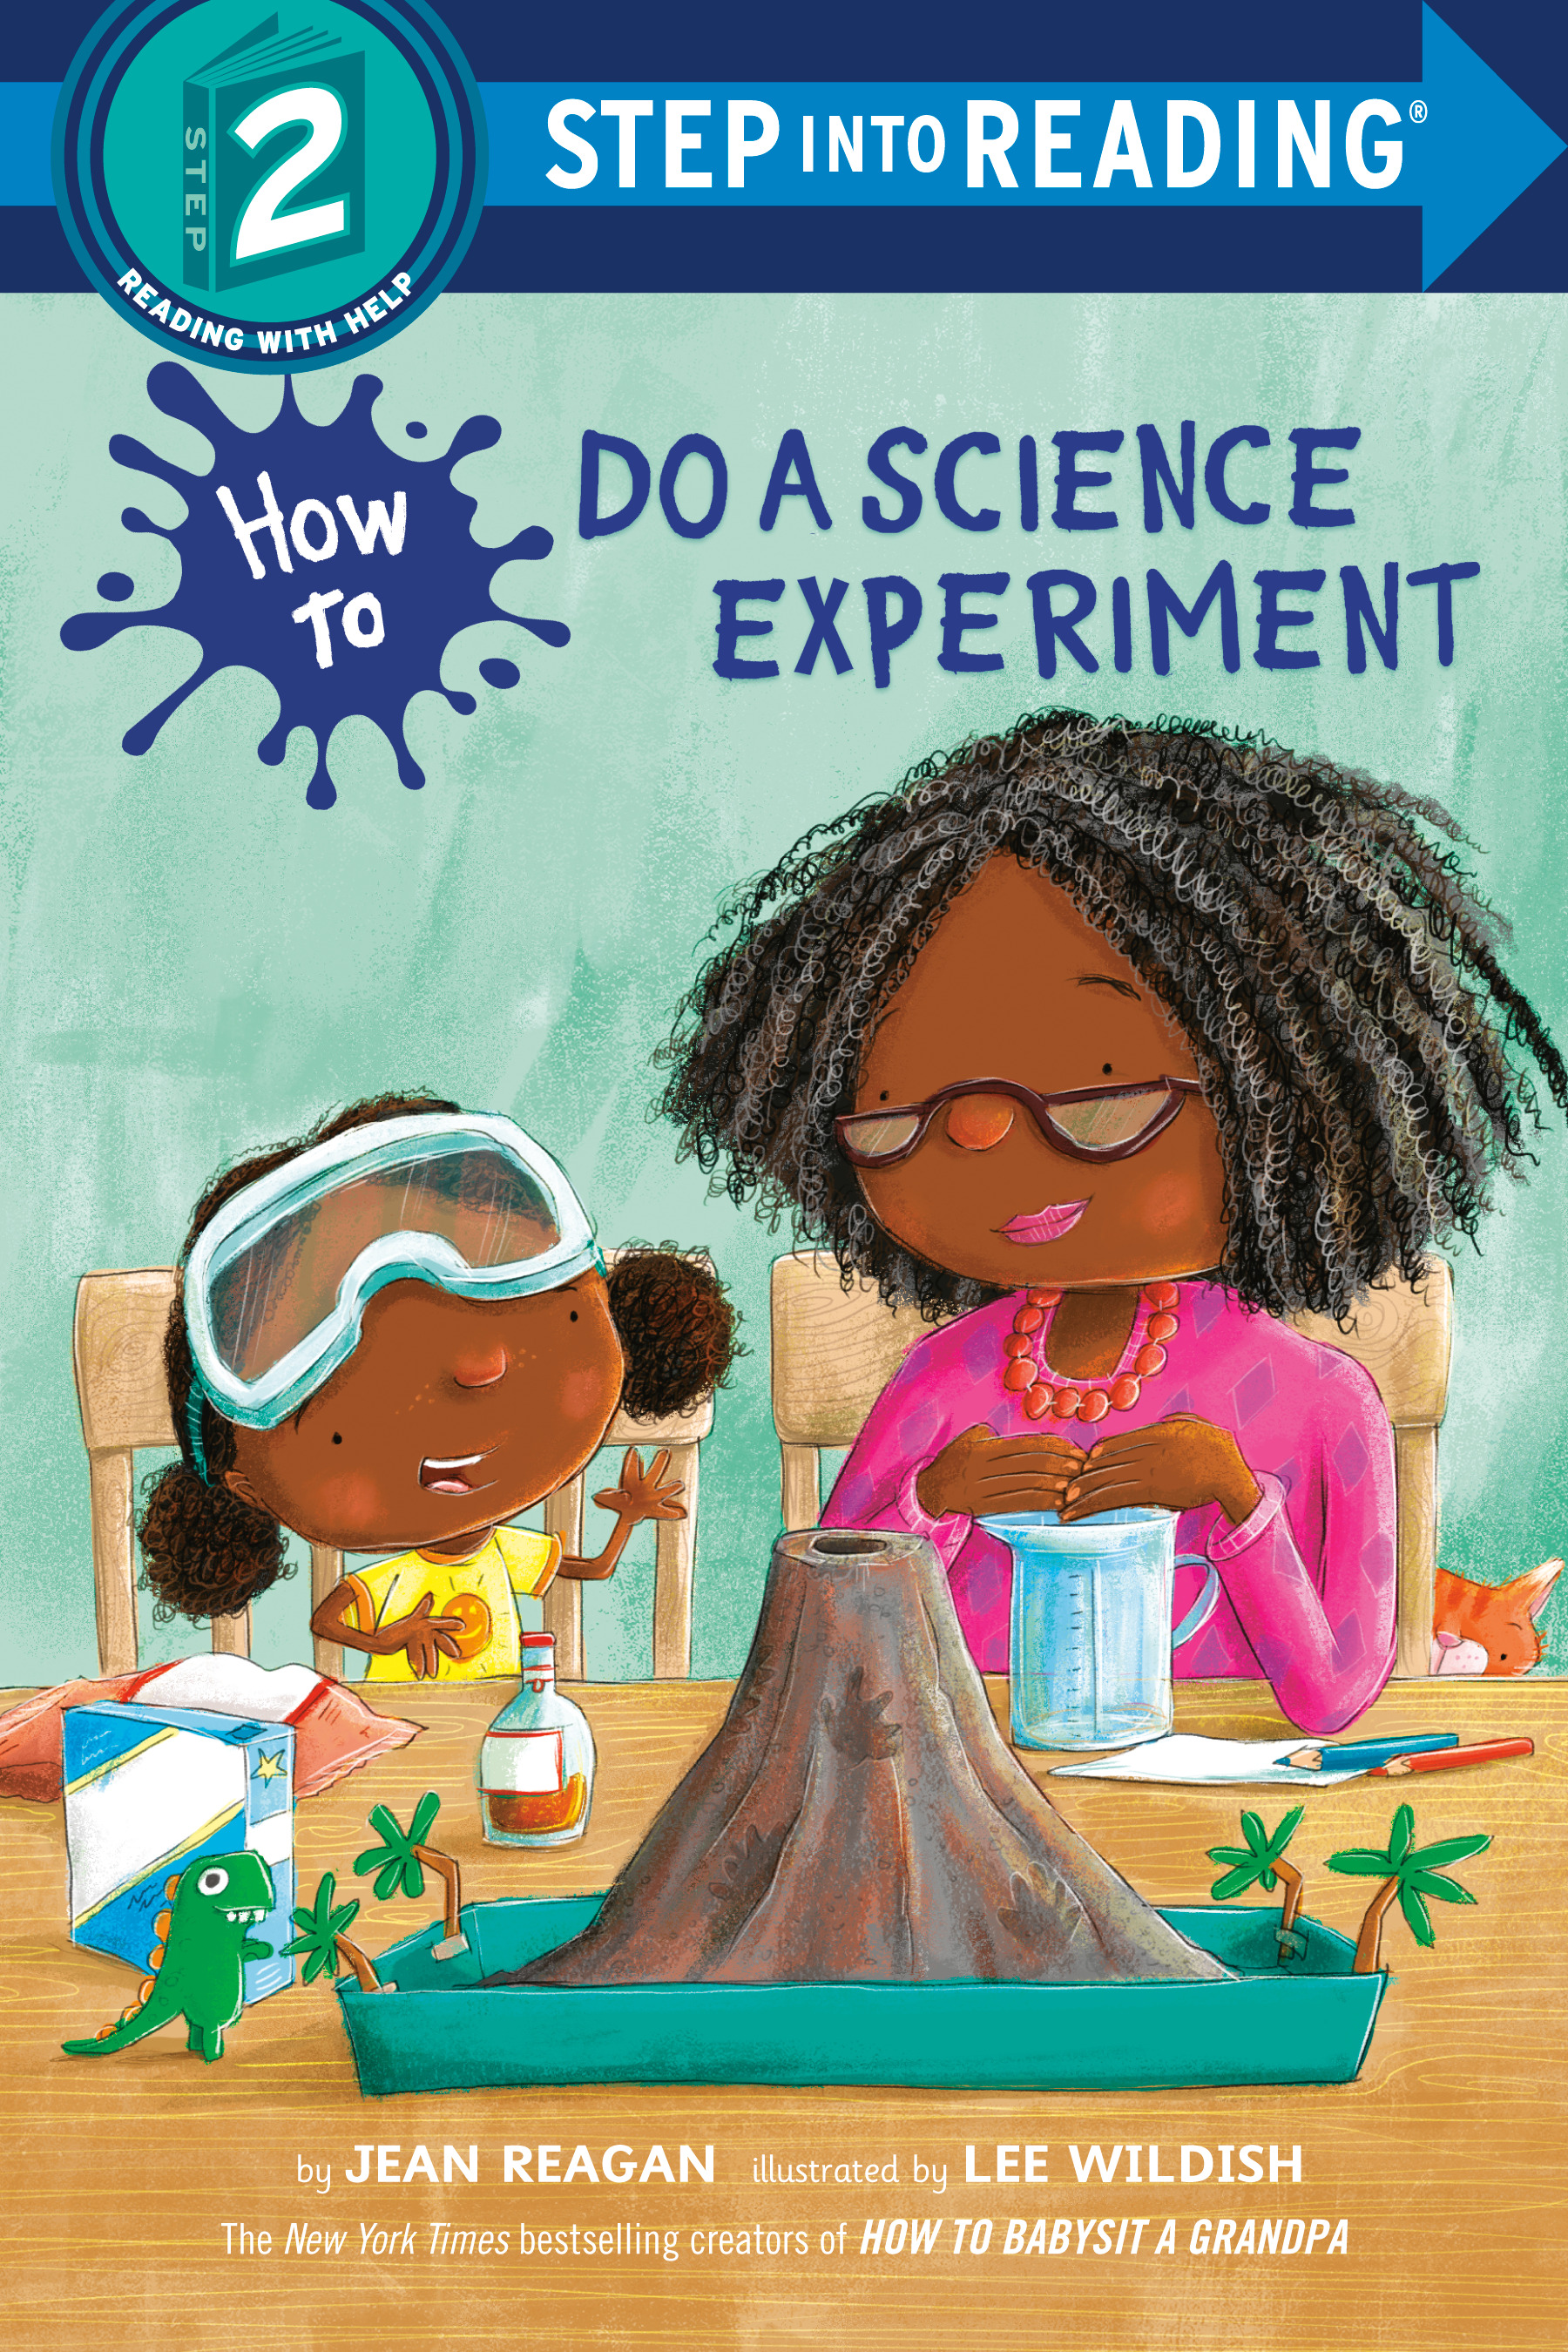 How to Do a Science Experiment | First reader